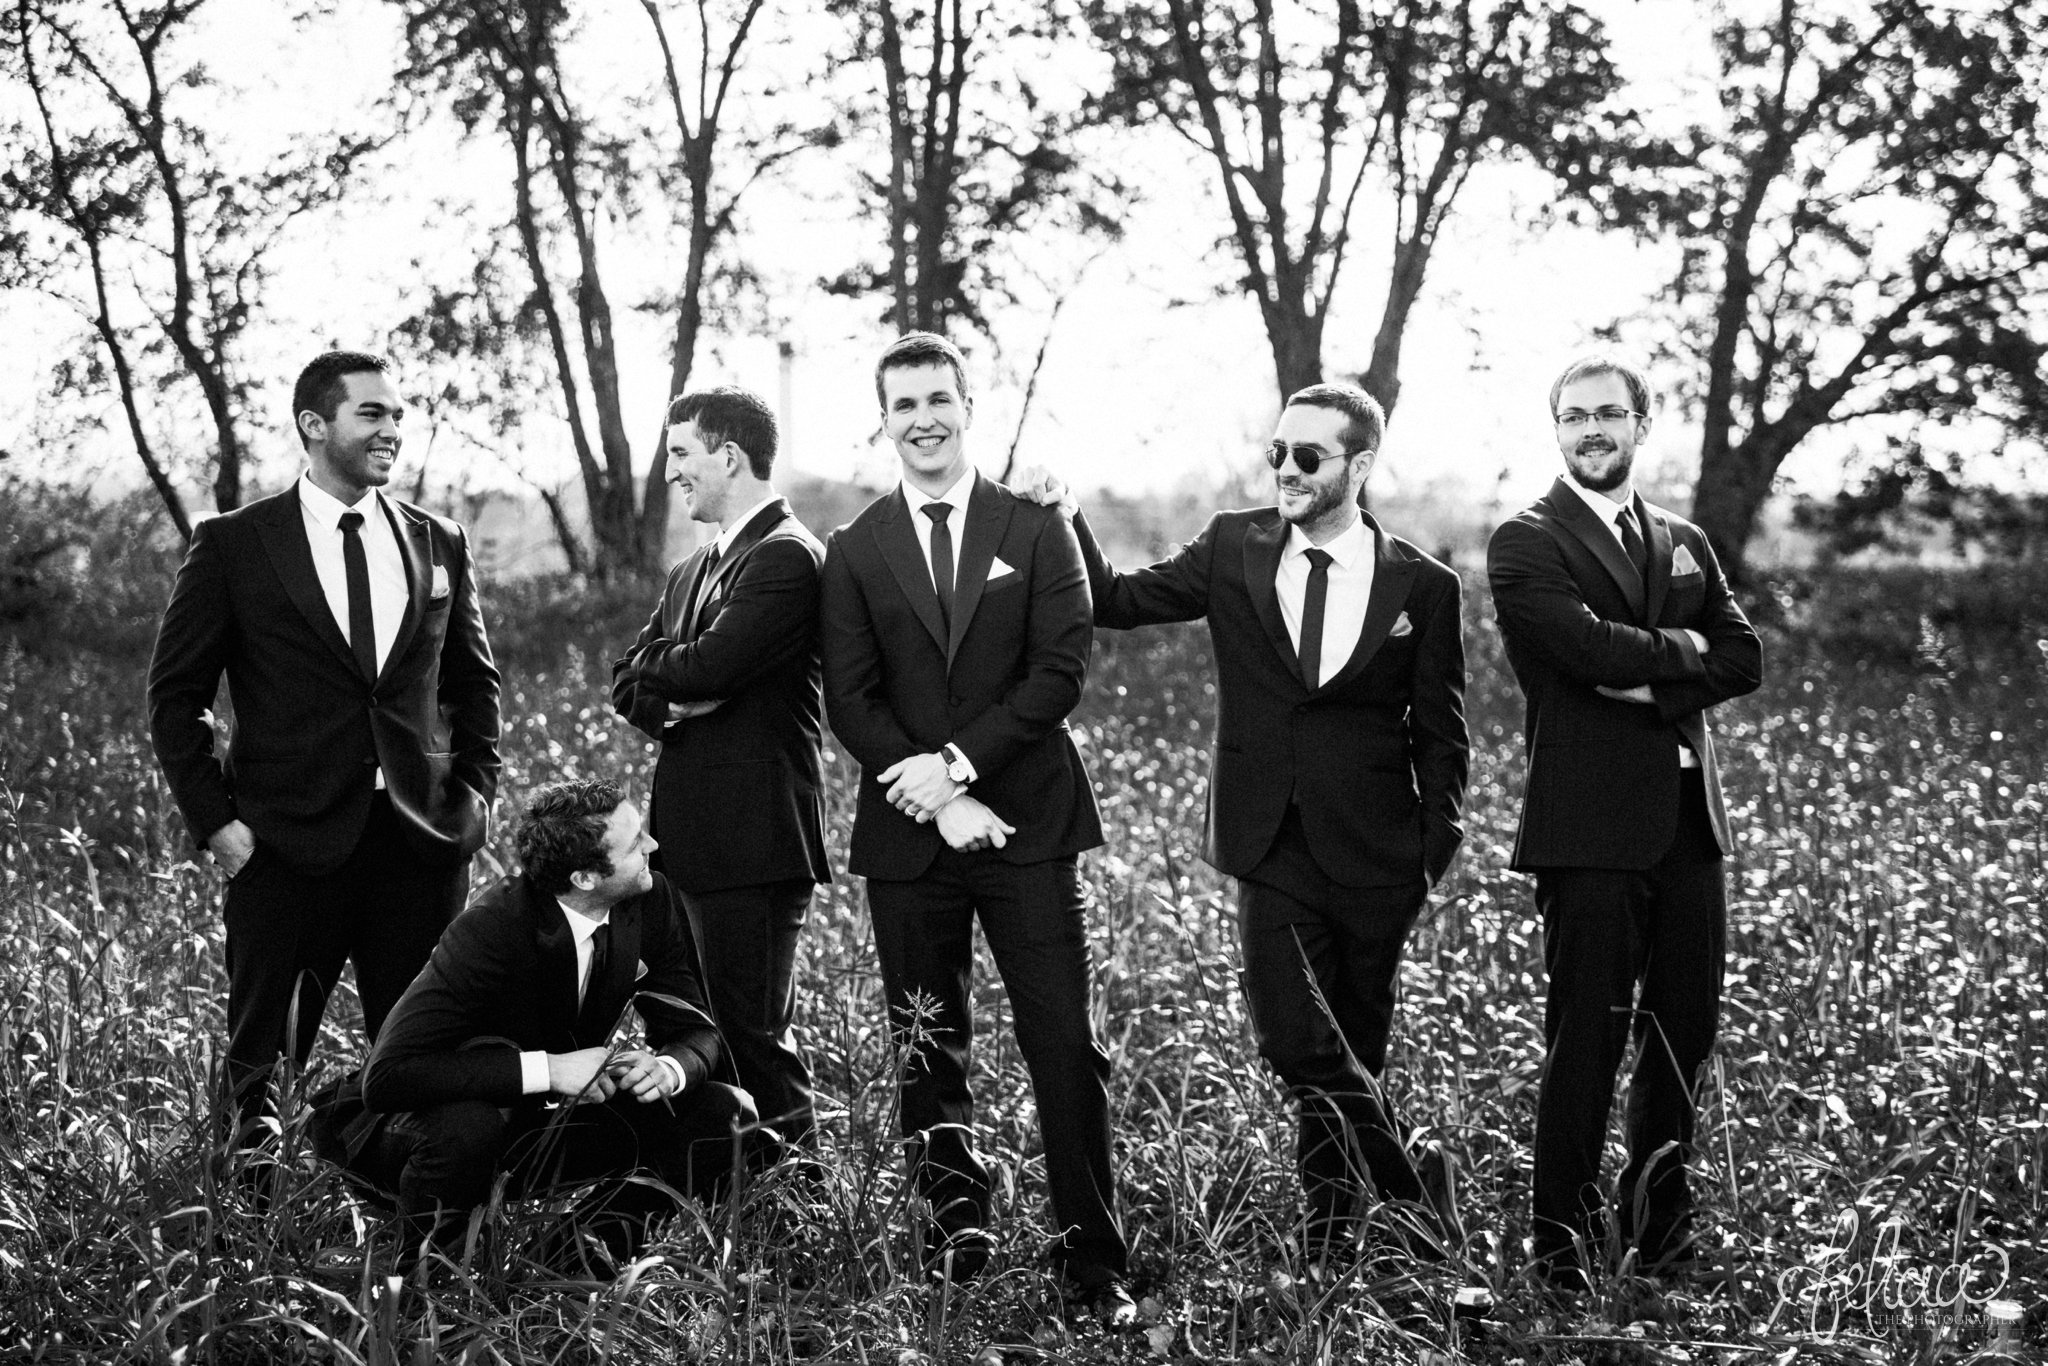 black and white | weddings | wedding photos | wedding photography | images by feliciathephotographer.com | St. Therese Catholic Church | Kansas City | downtown | The Terrace on Grand | bridal party portraits | grassy field | field | nature | candid | groomsmen portrait | casual poses | funny groomsmen | The Black Tux